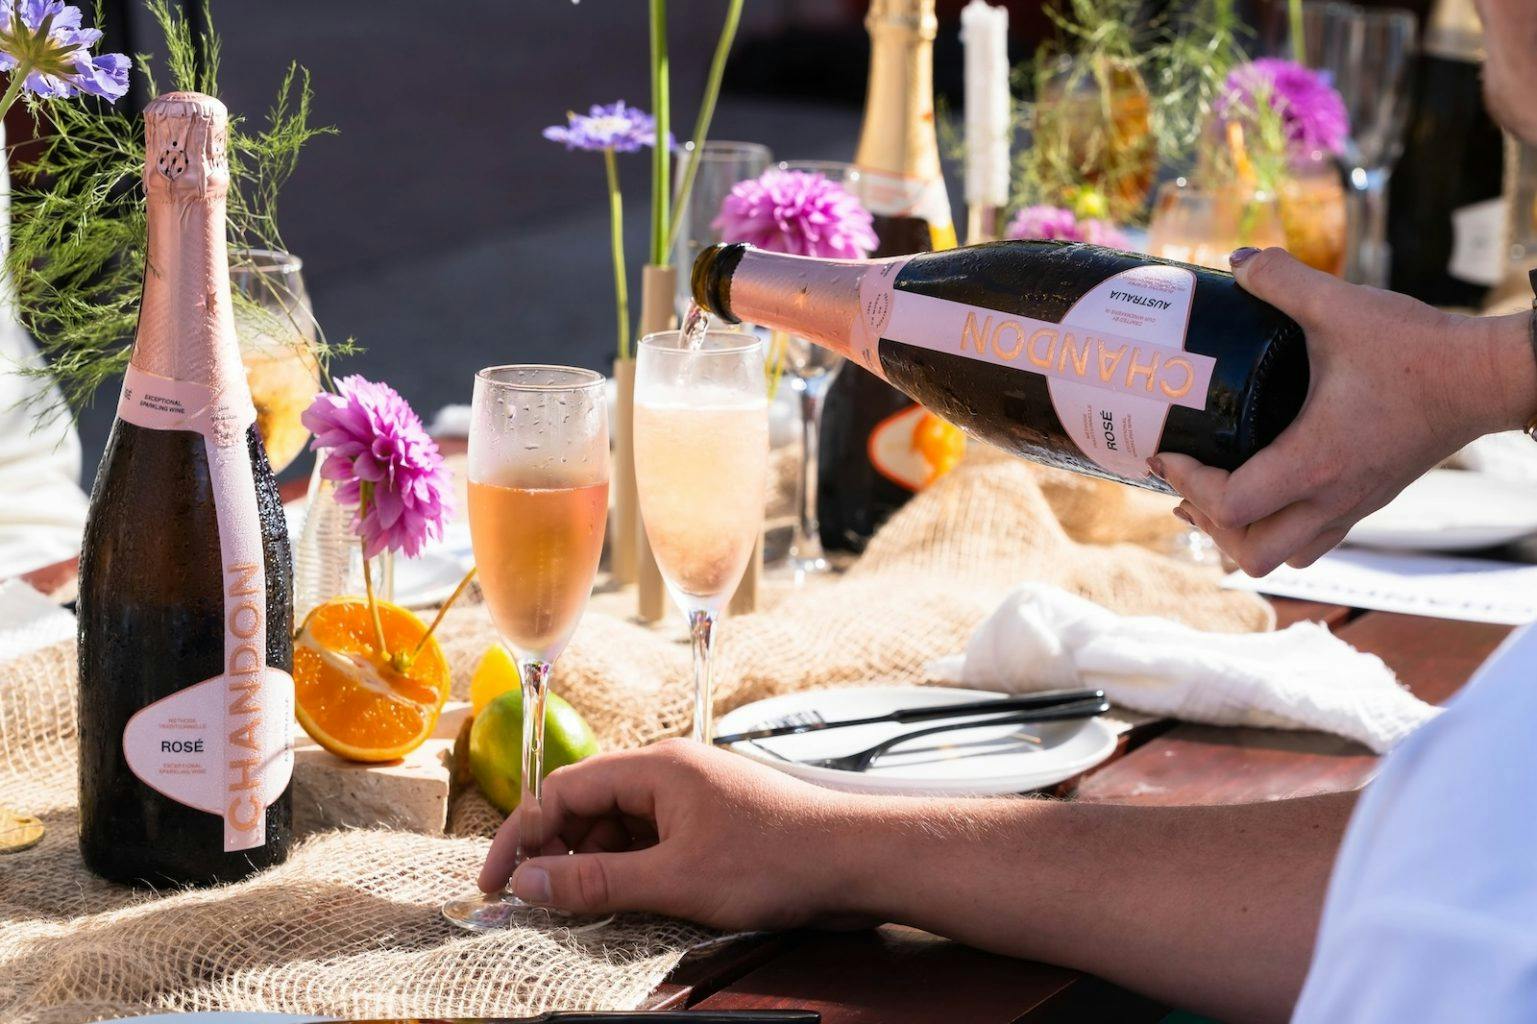 Chandon Australia have joined forces with the nation’s biggest pub, The Camfield, for a stunning night of sparkling under the stars.